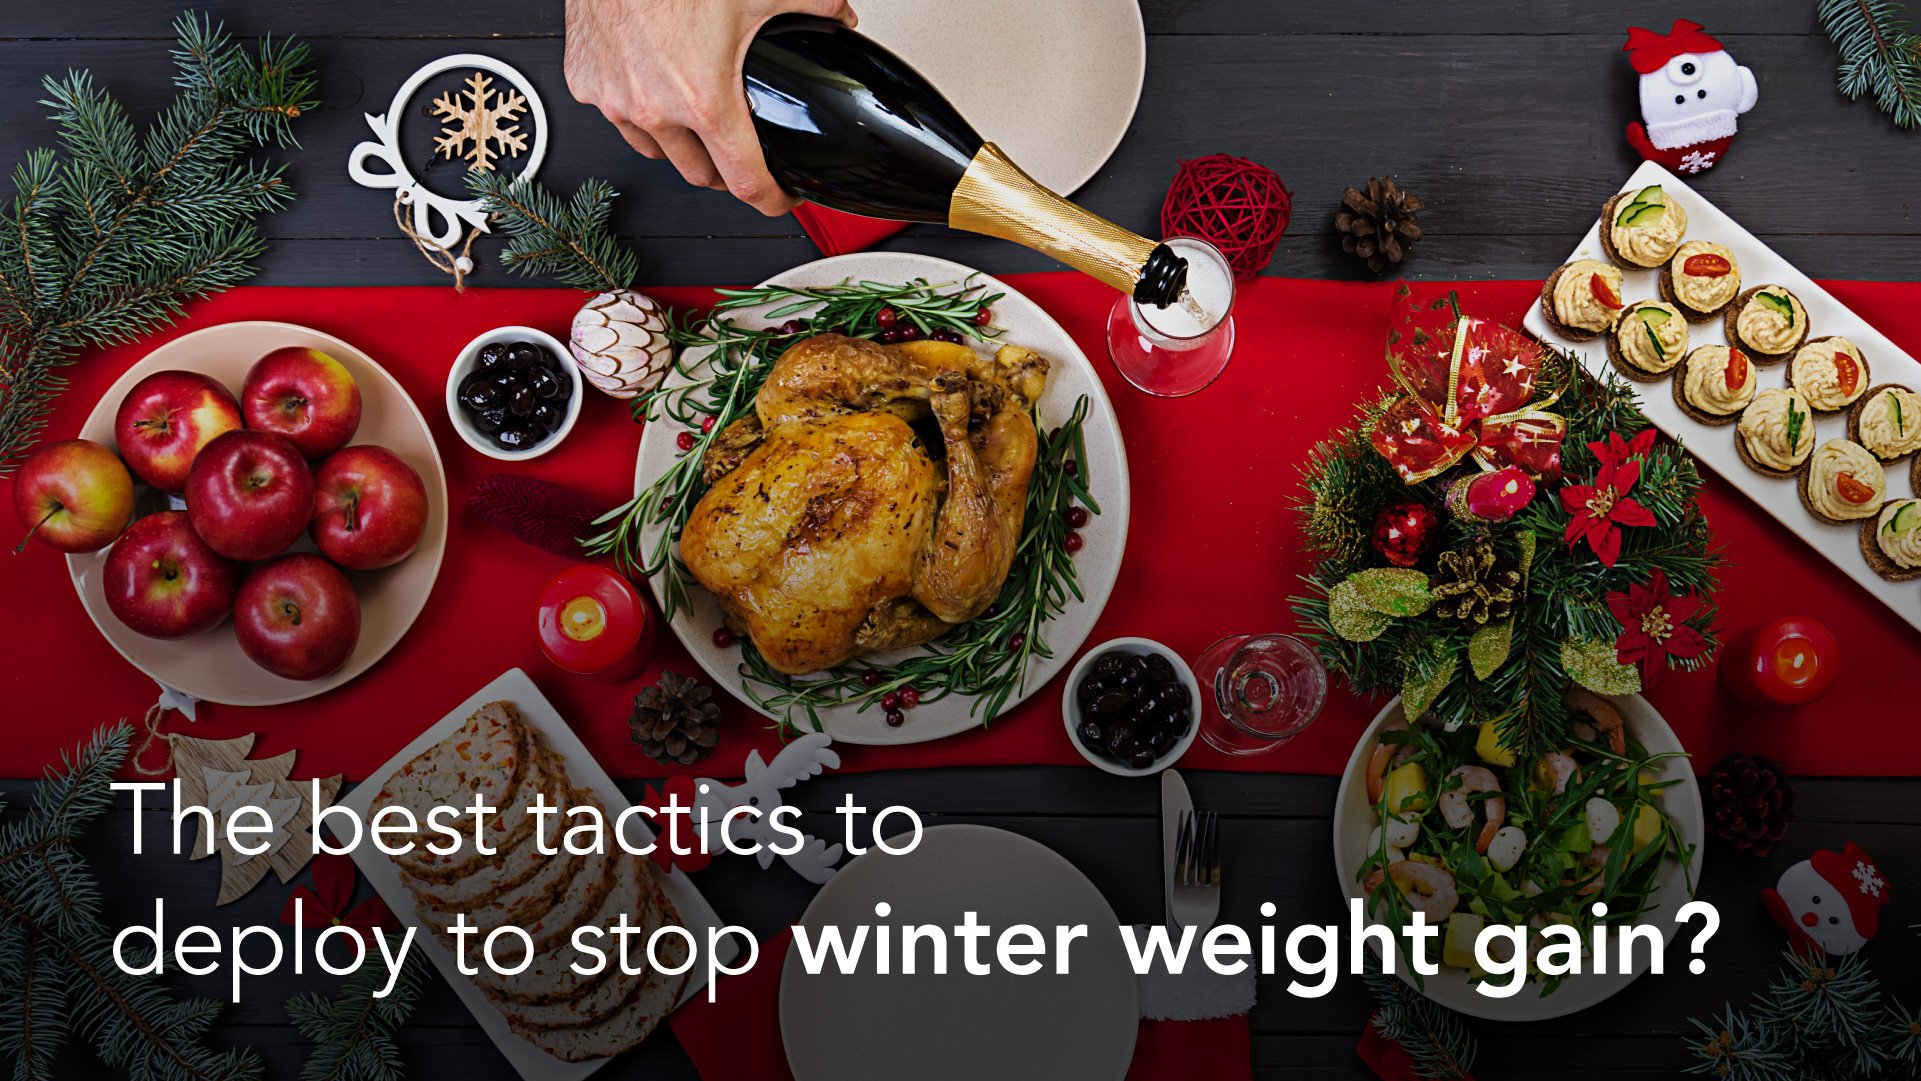 The best tactics to deploy to stop winter weight gain?